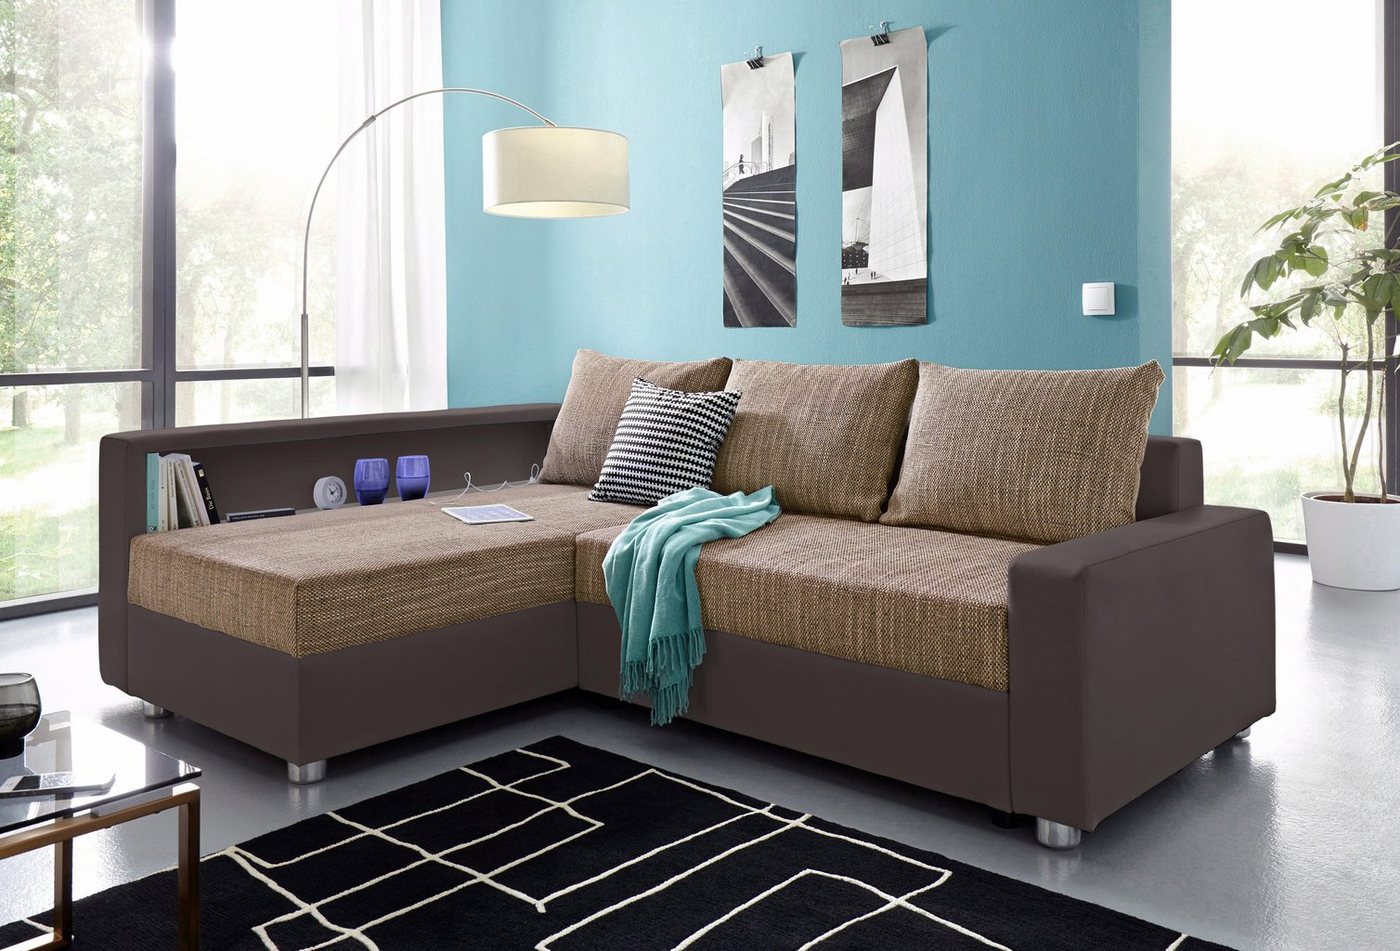 COLLECTION AB Ecksofa Relax L-Form, inklusive Bettfunktion, Federkern, wahlweise mit RGB-LED-Beleuchtung von COLLECTION AB